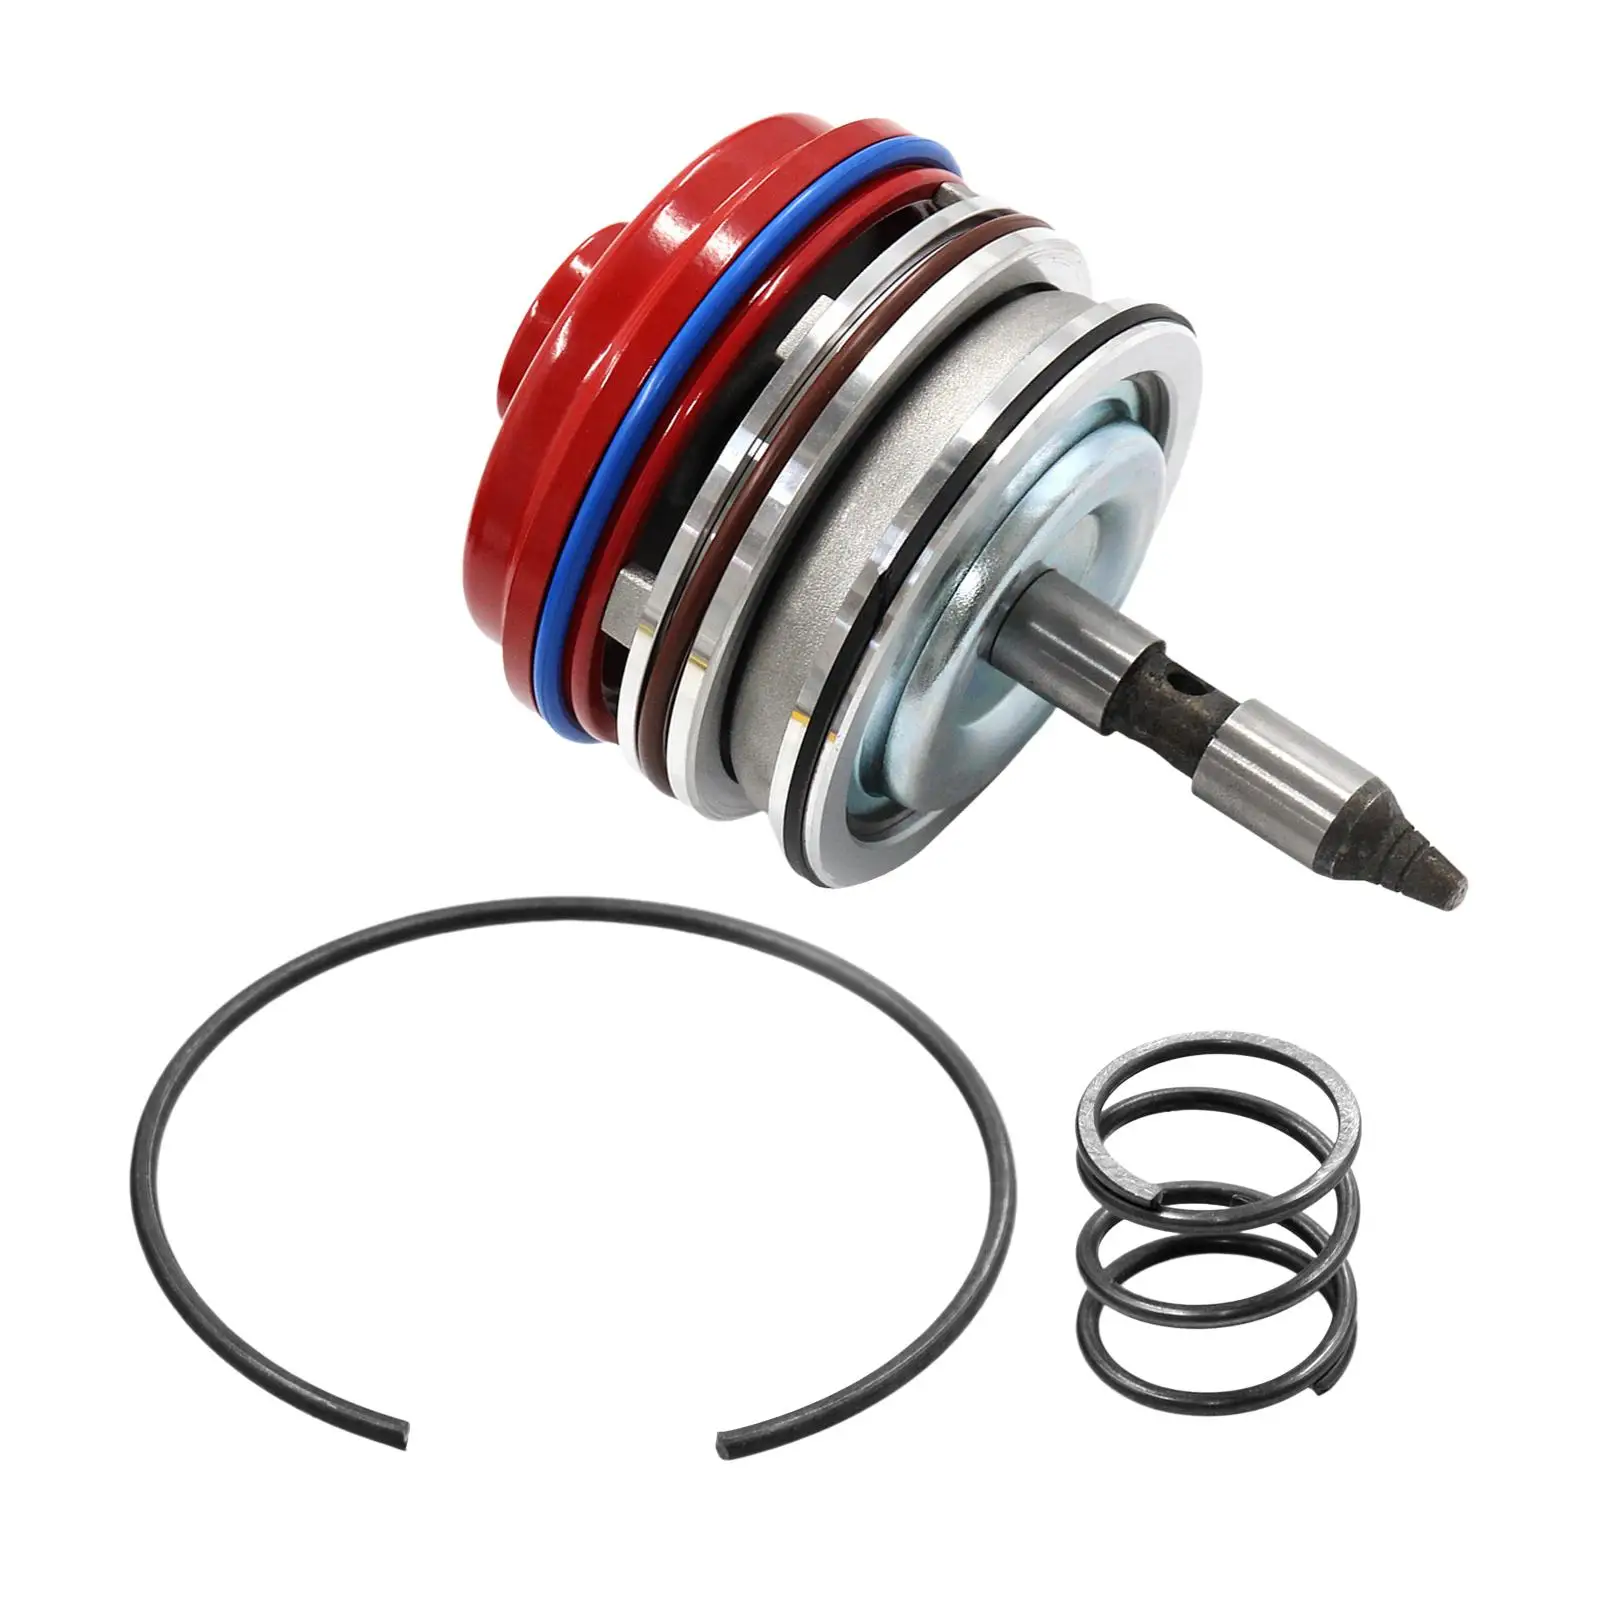 Servo Piston HD High Performance Heavy Duty Builds Transmissions Replacement